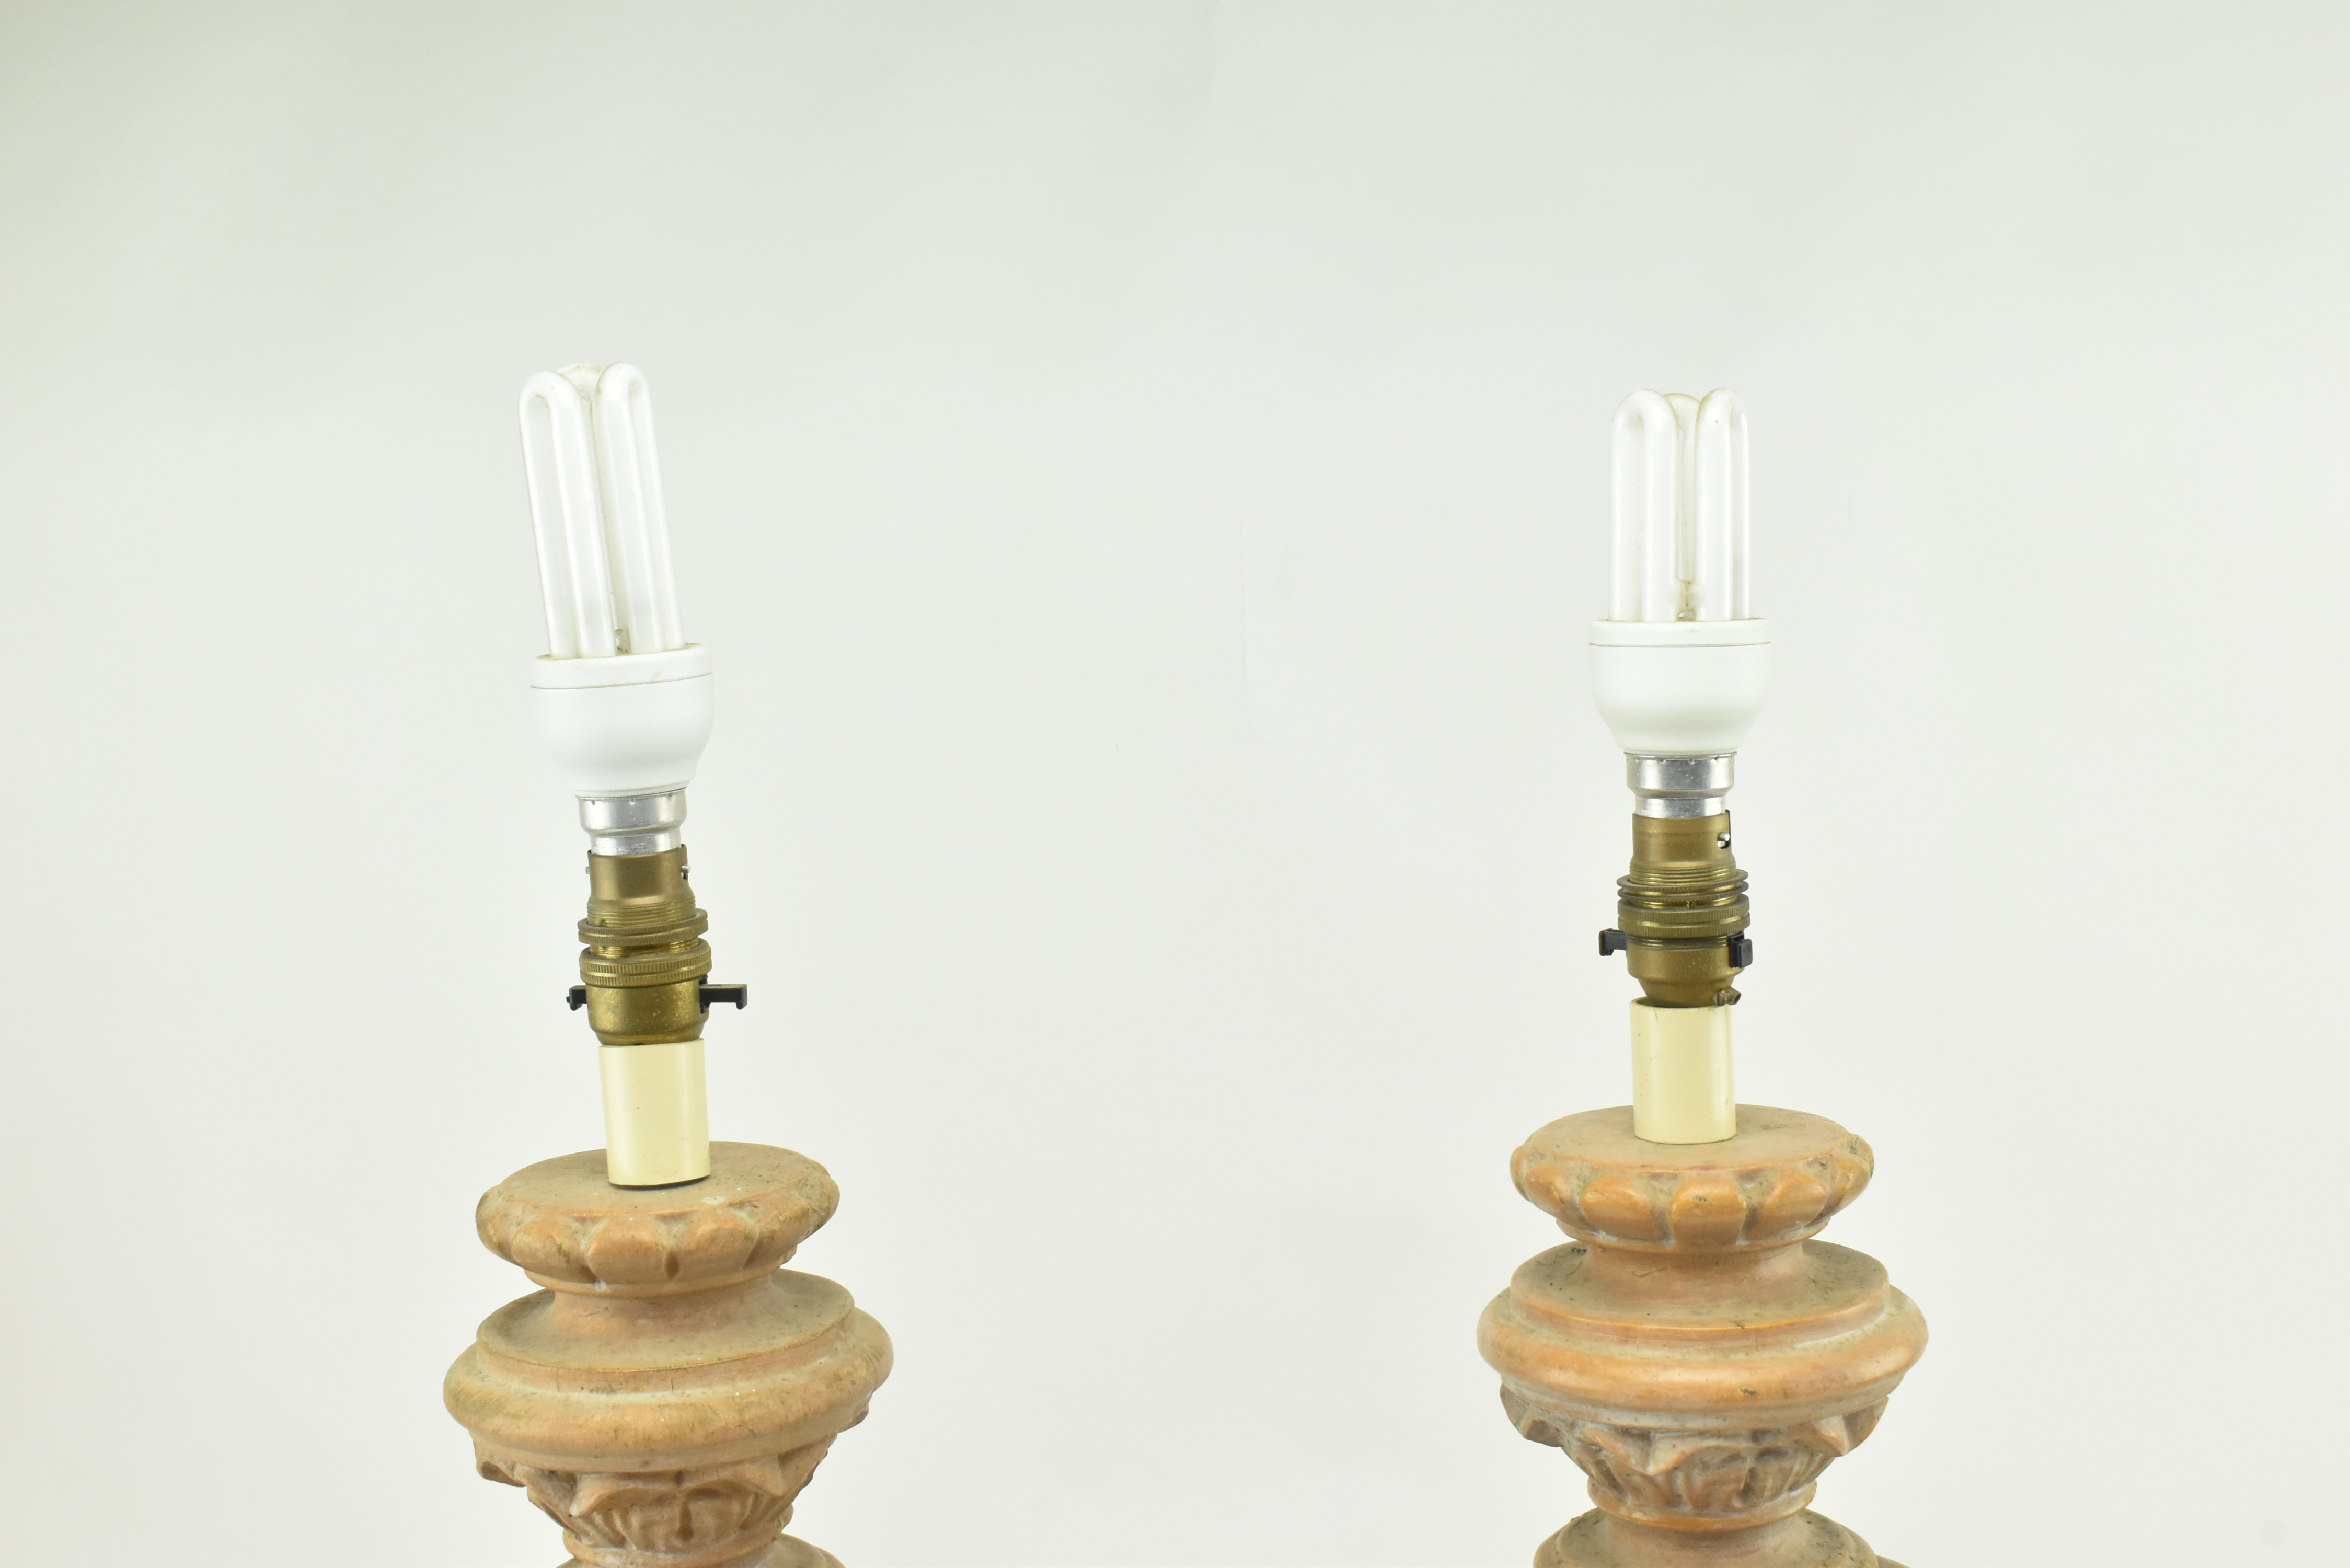 PAIR OF CLASSICAL STYLE RESIN WOODEN EFFECT DESK LAMPS - Image 2 of 6